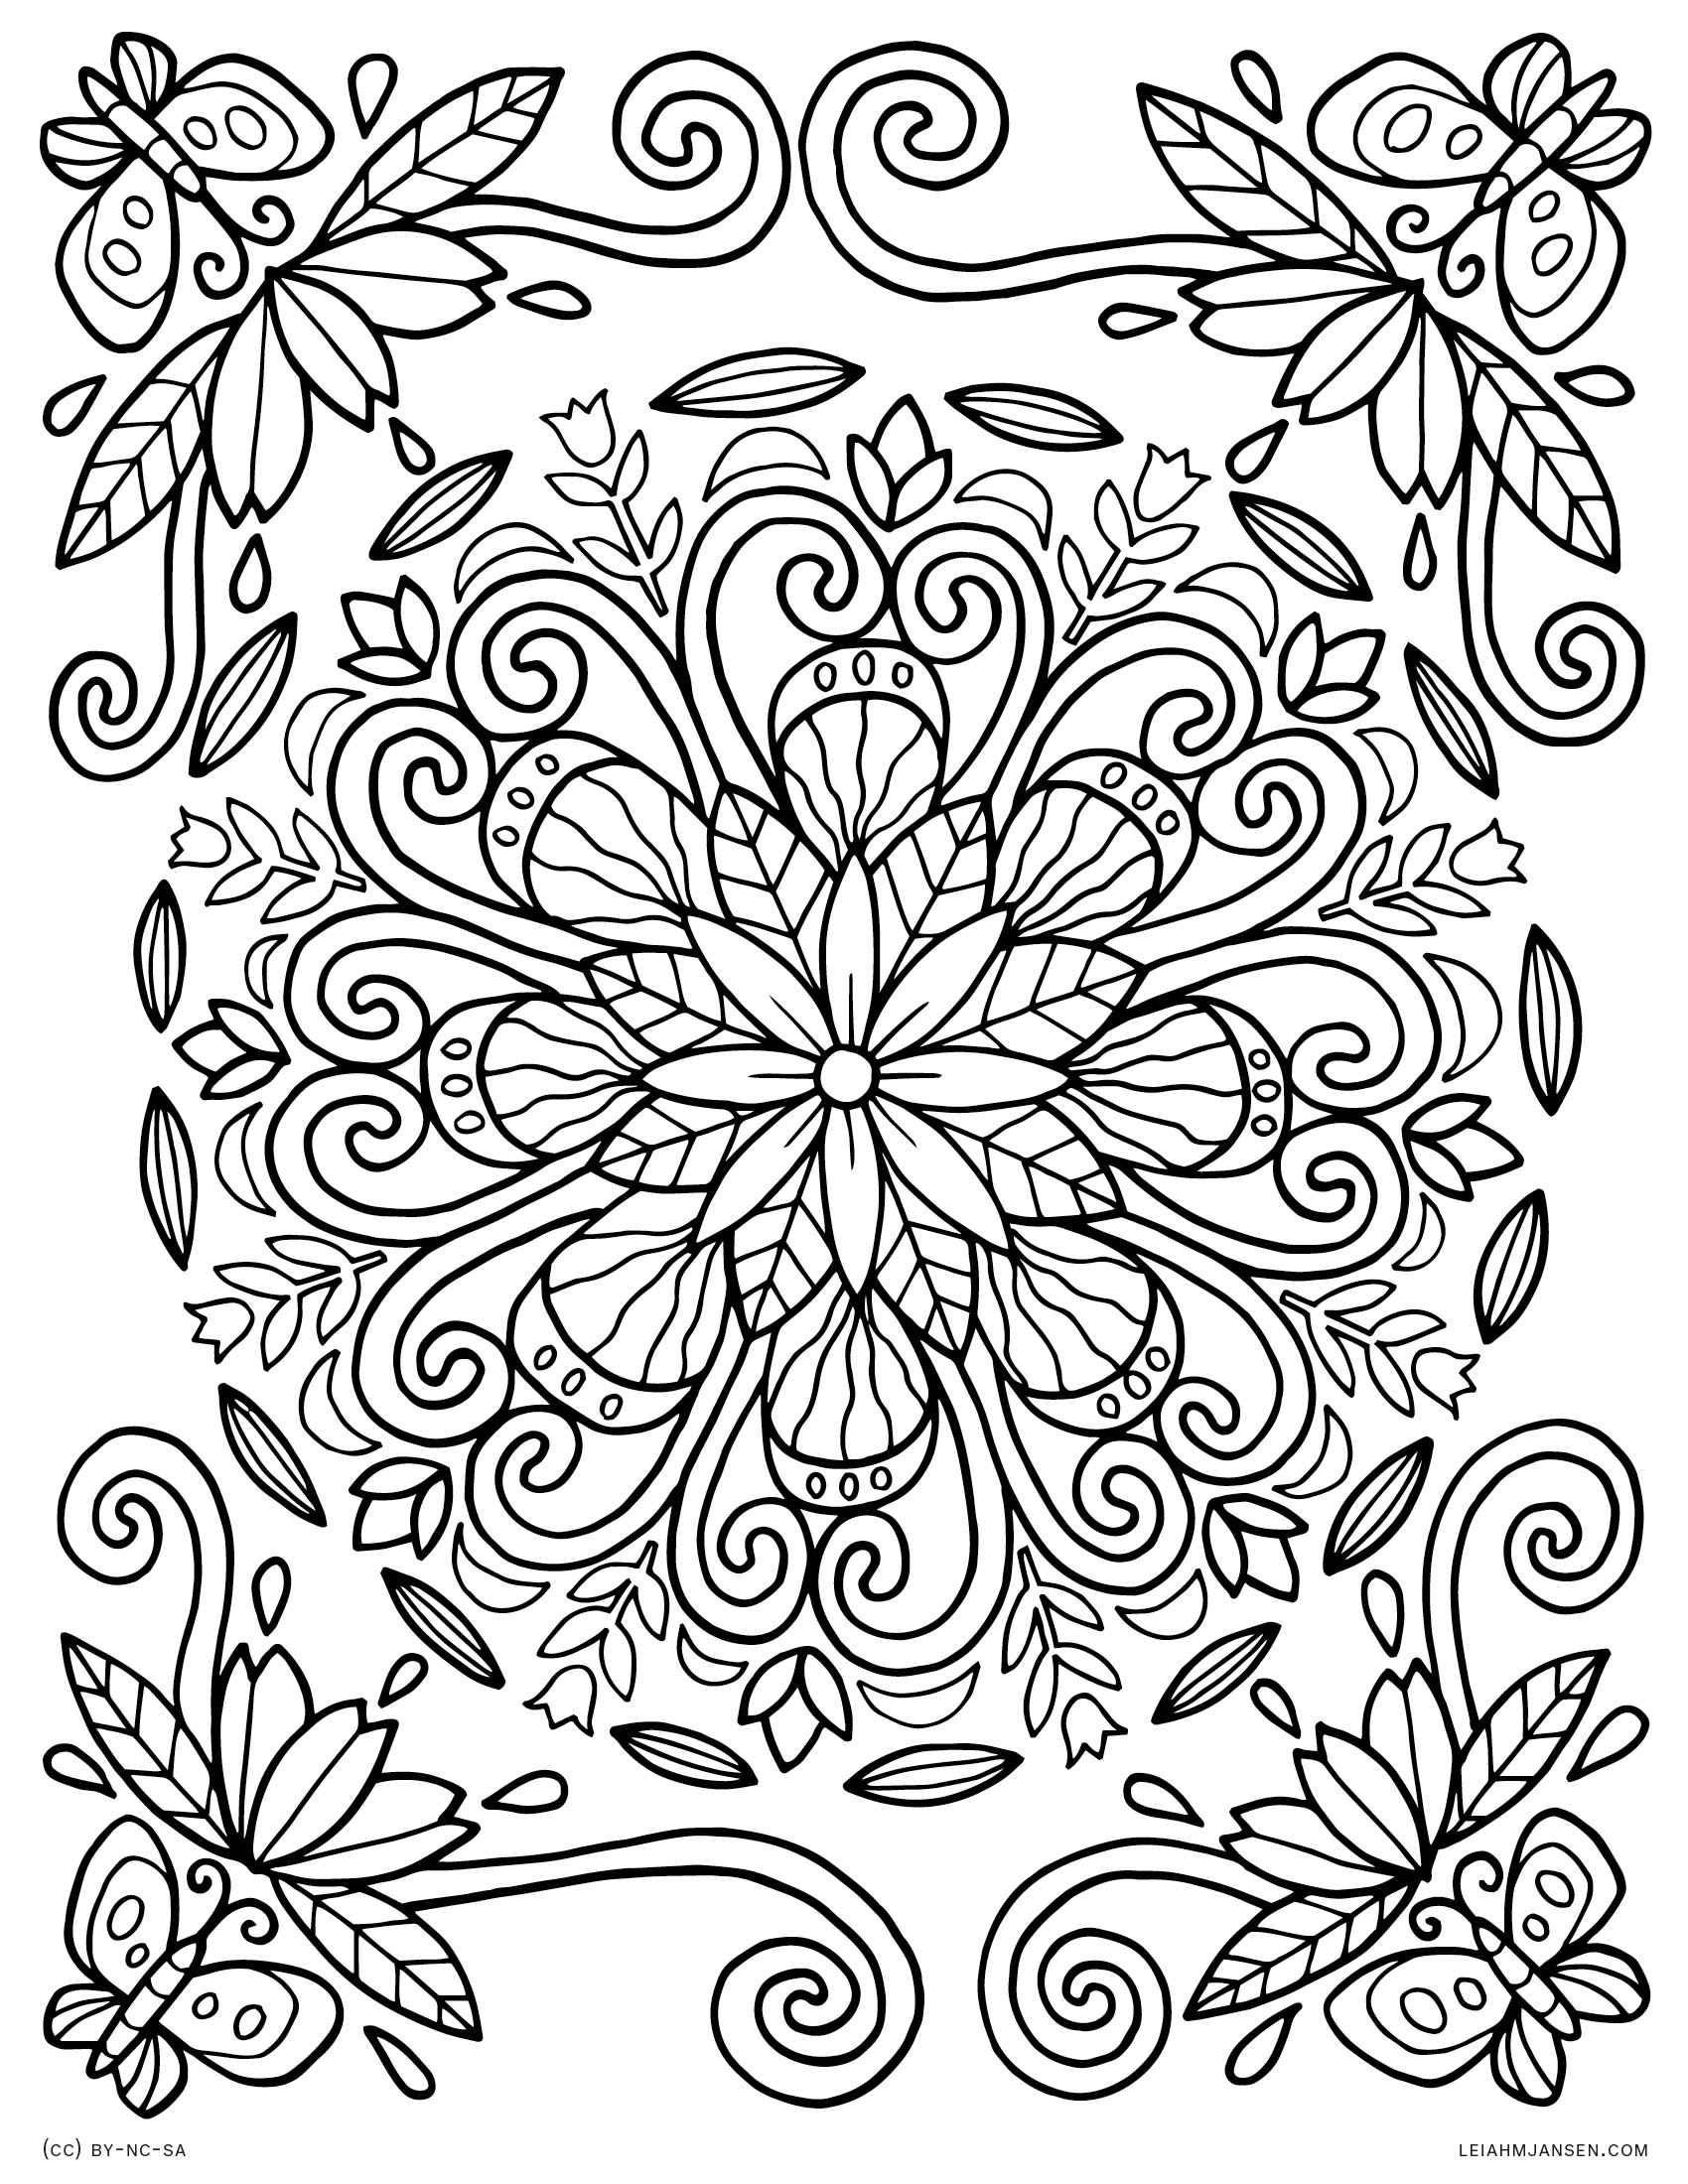 Coloring Pages - Free Printable Nature Coloring Pages For Adults